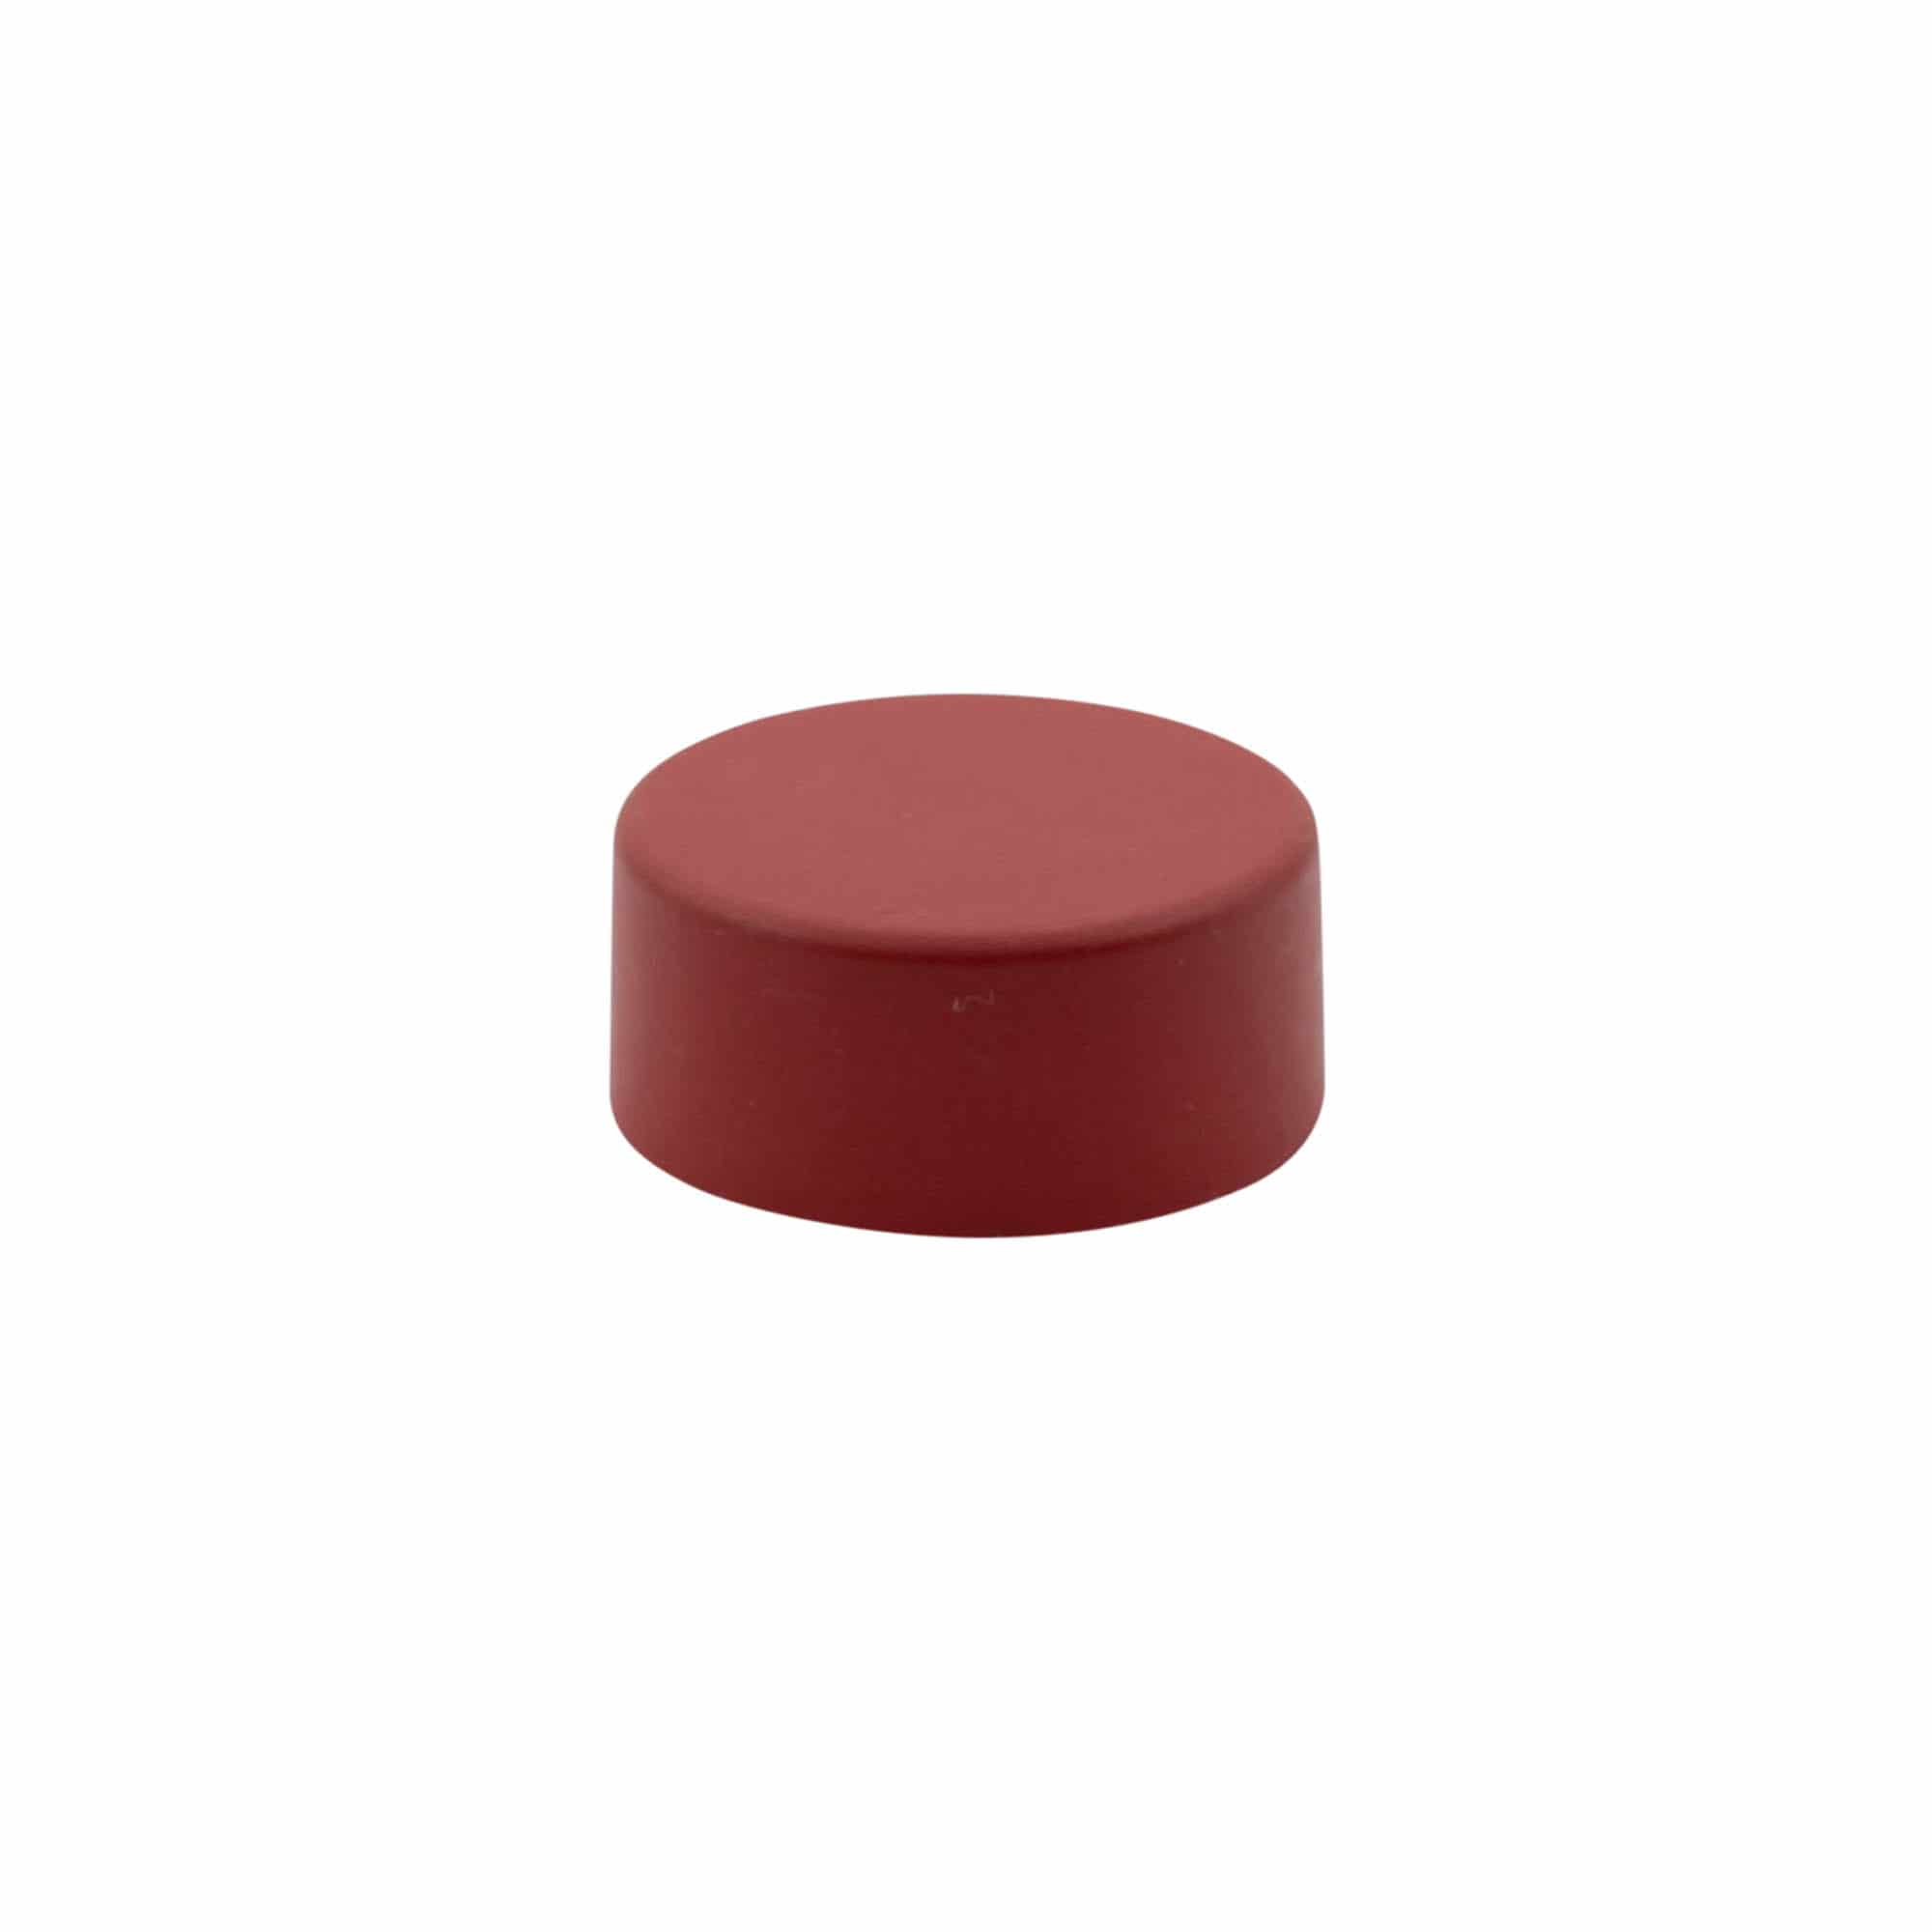 Screw cap, ABS plastic, red, for opening: GPI 28/400